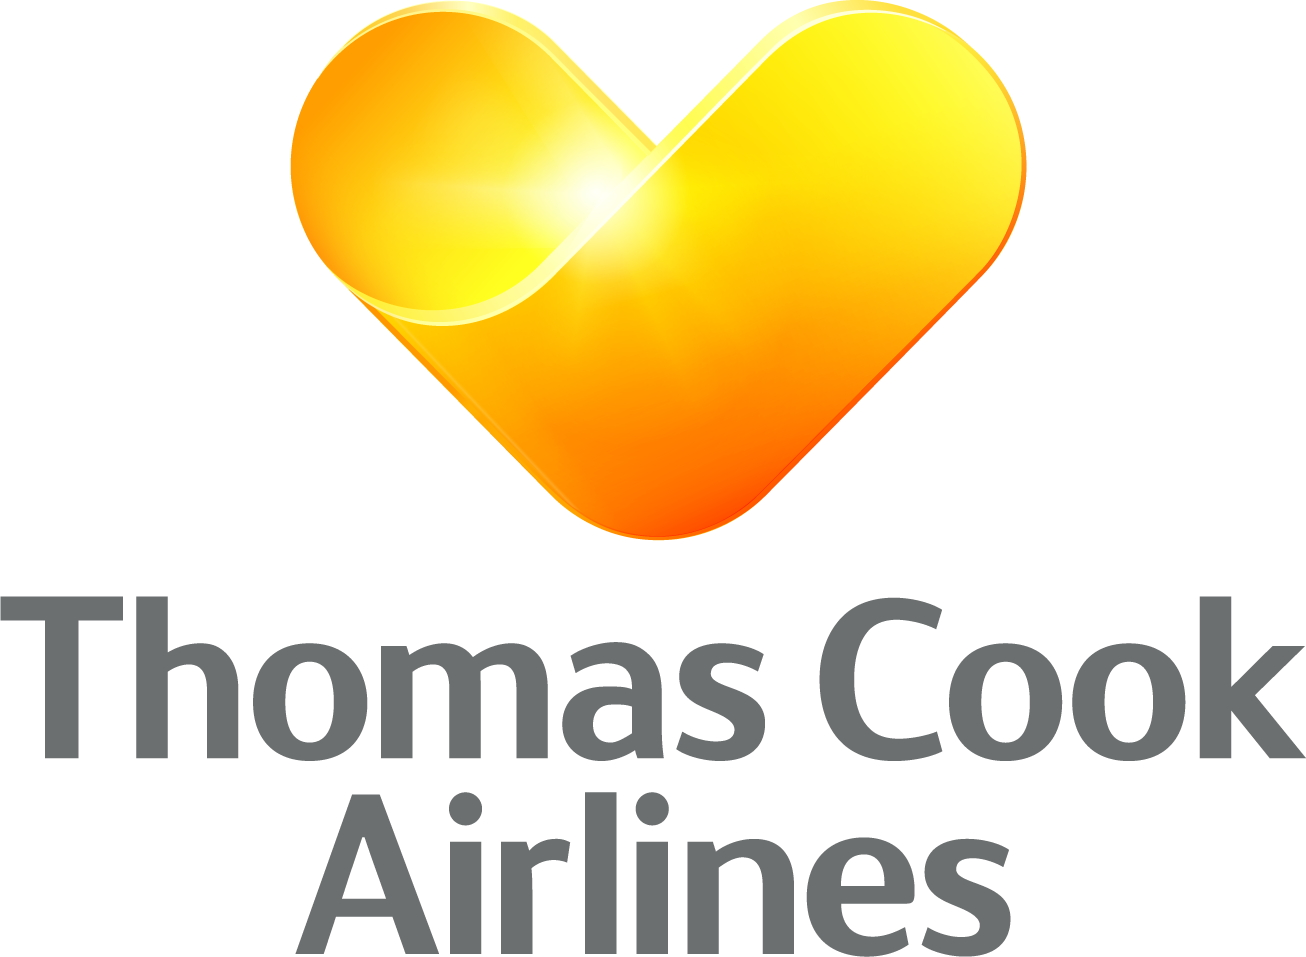 Thomas Cook Airlines logo